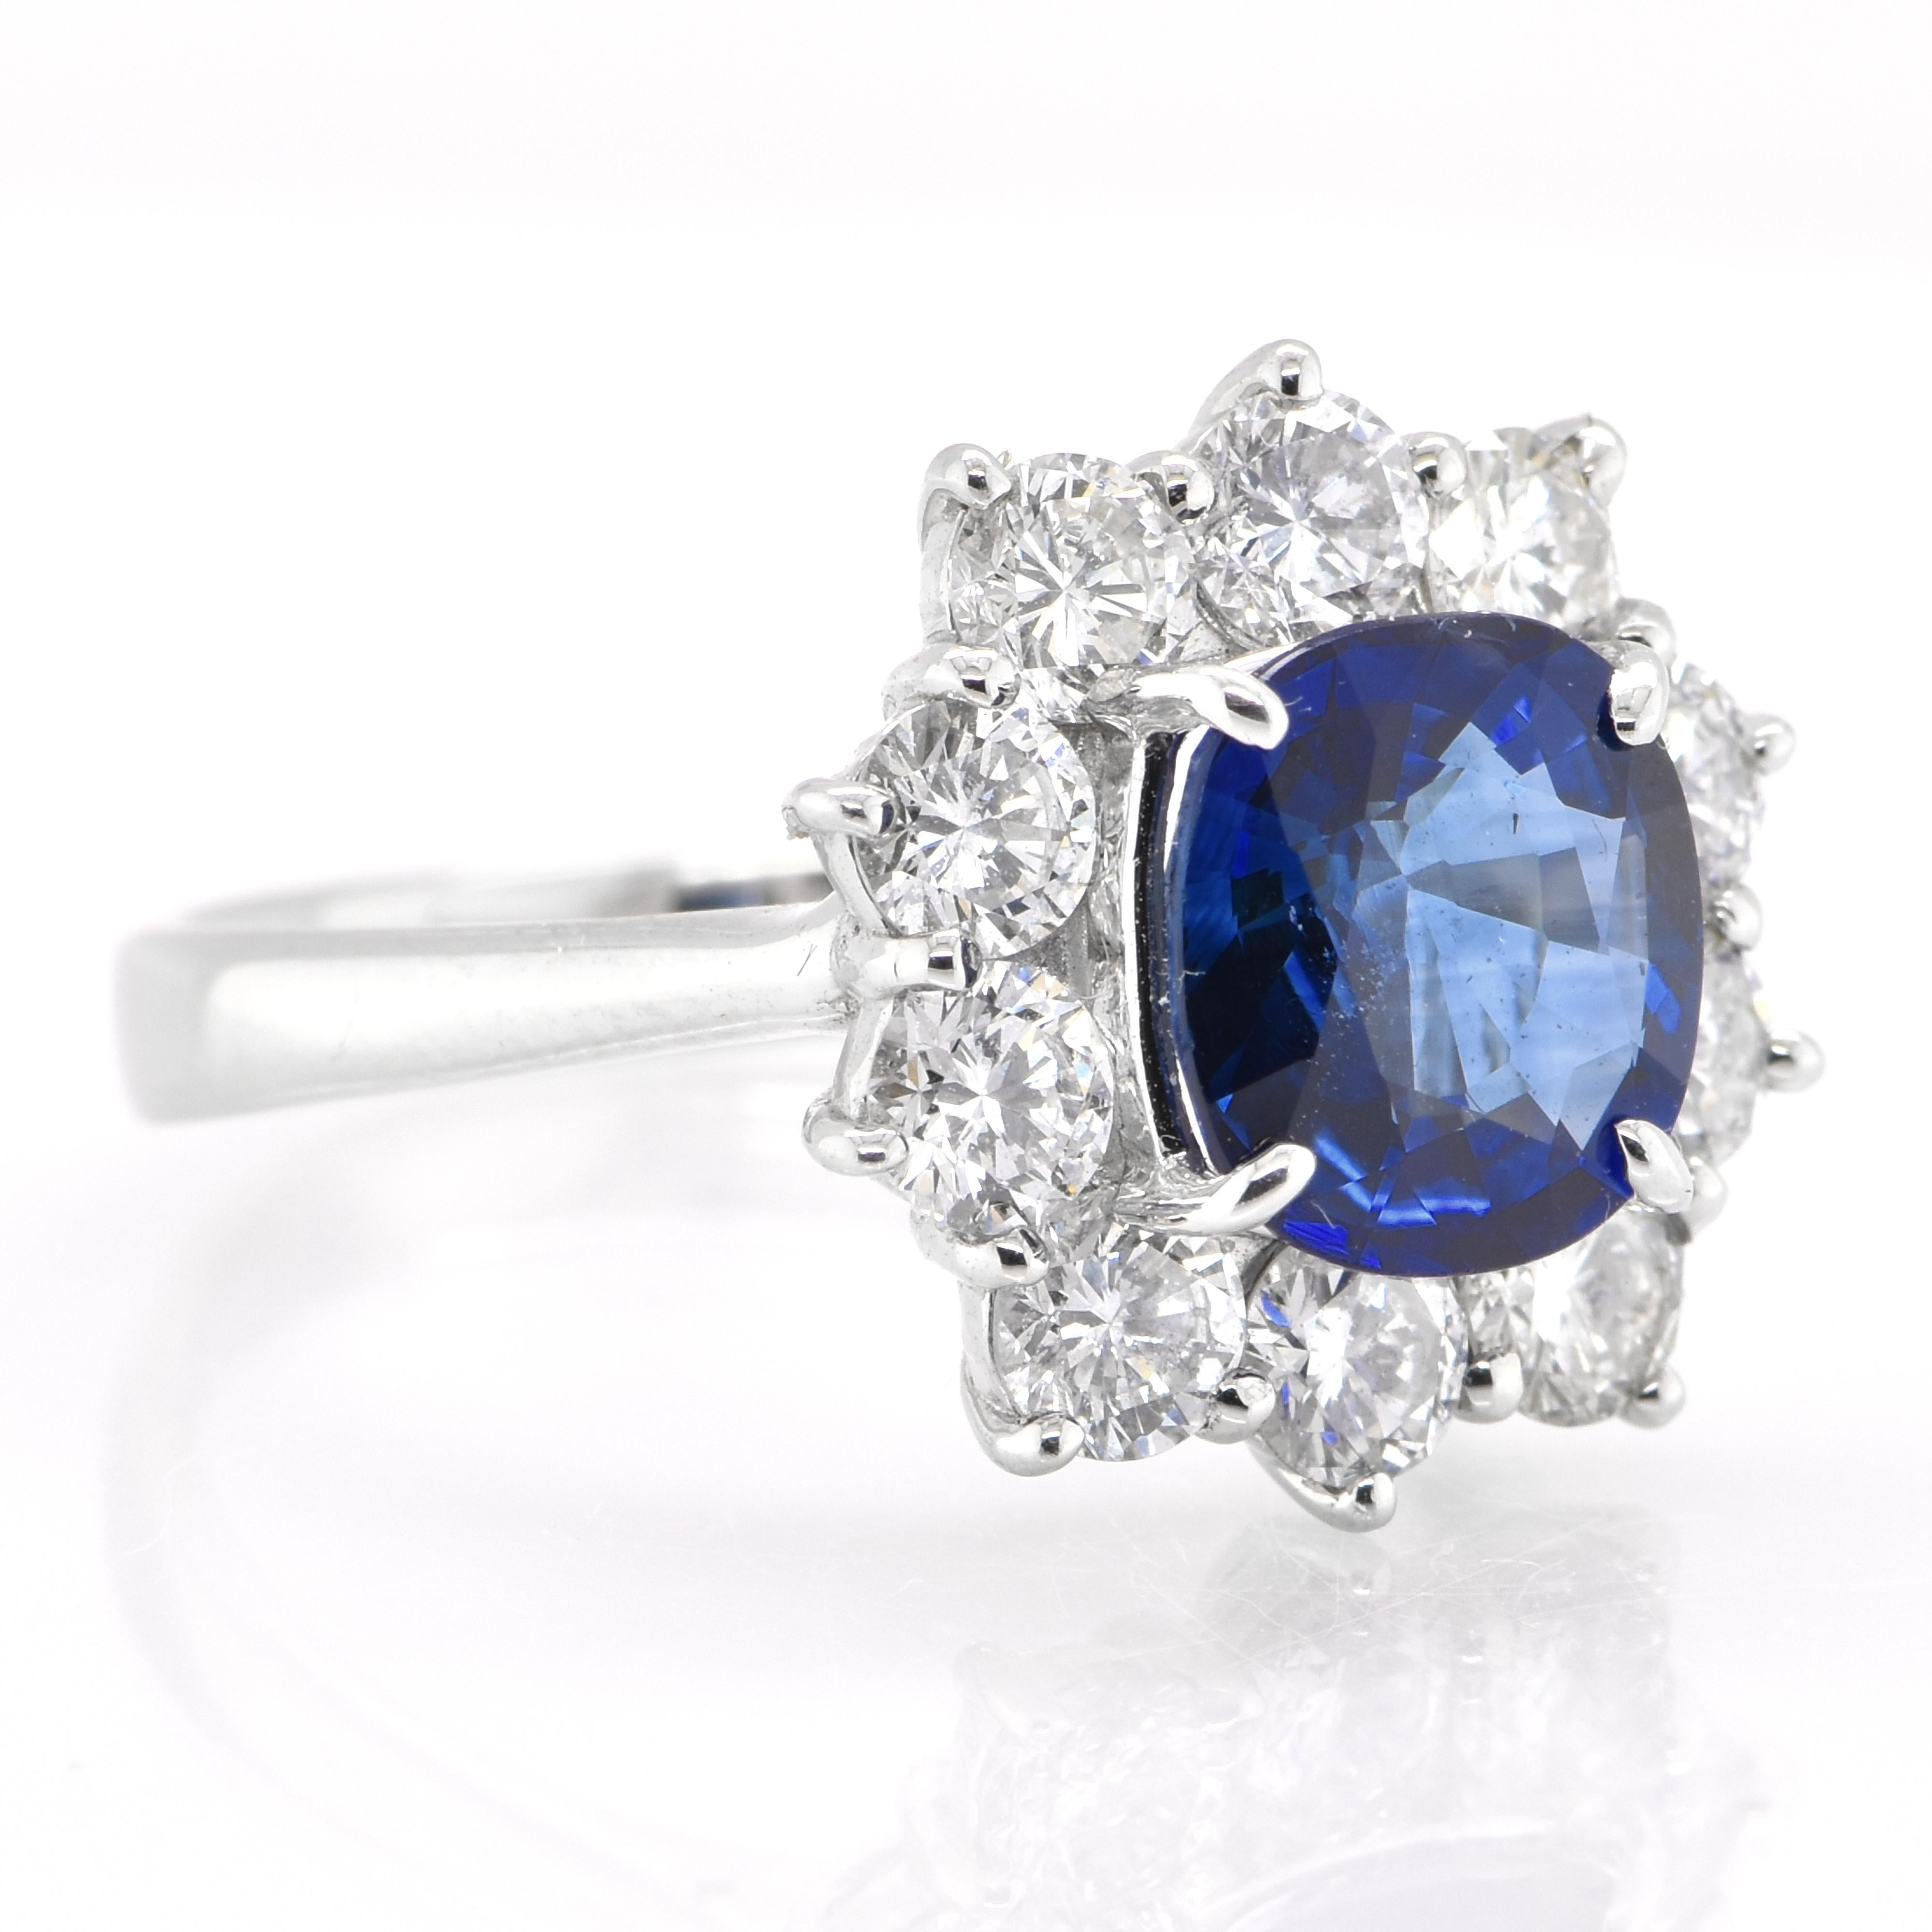 A beautiful ring featuring a 2.33 Carat Natural Sapphire and 1.43 Carats Diamond Accents set in Platinum. Sapphires have extraordinary durability - they excel in hardness as well as toughness and durability making them very popular in jewelry.